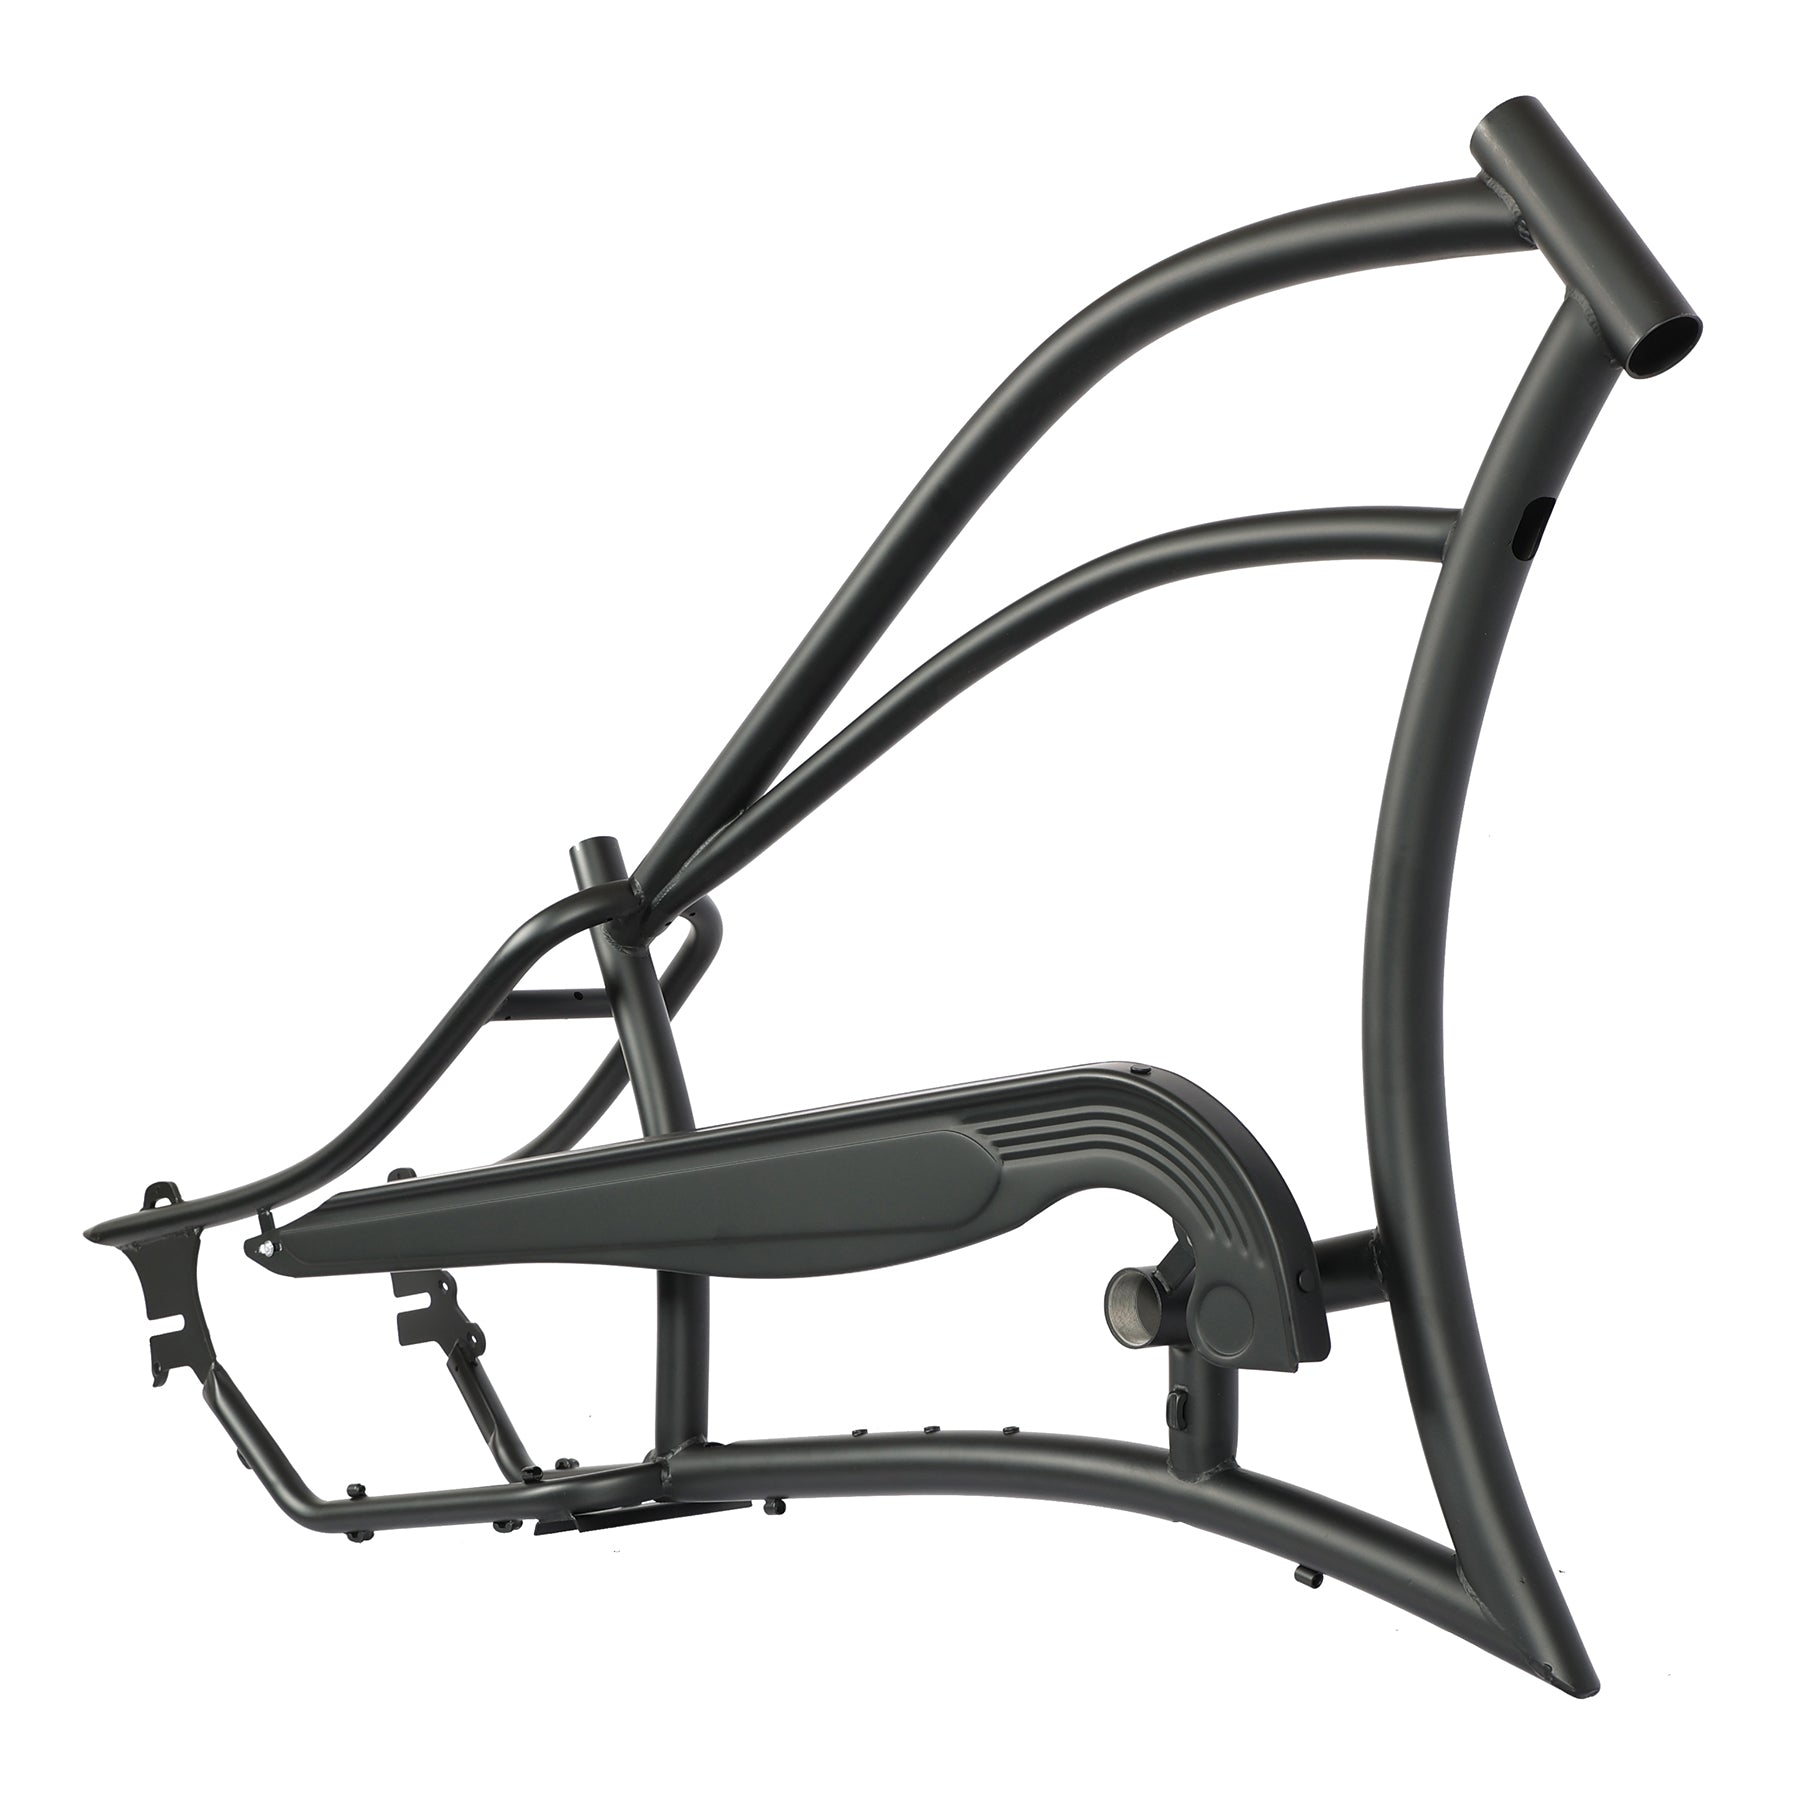 Tracer Tracker GT7 Frame with Chainguaid